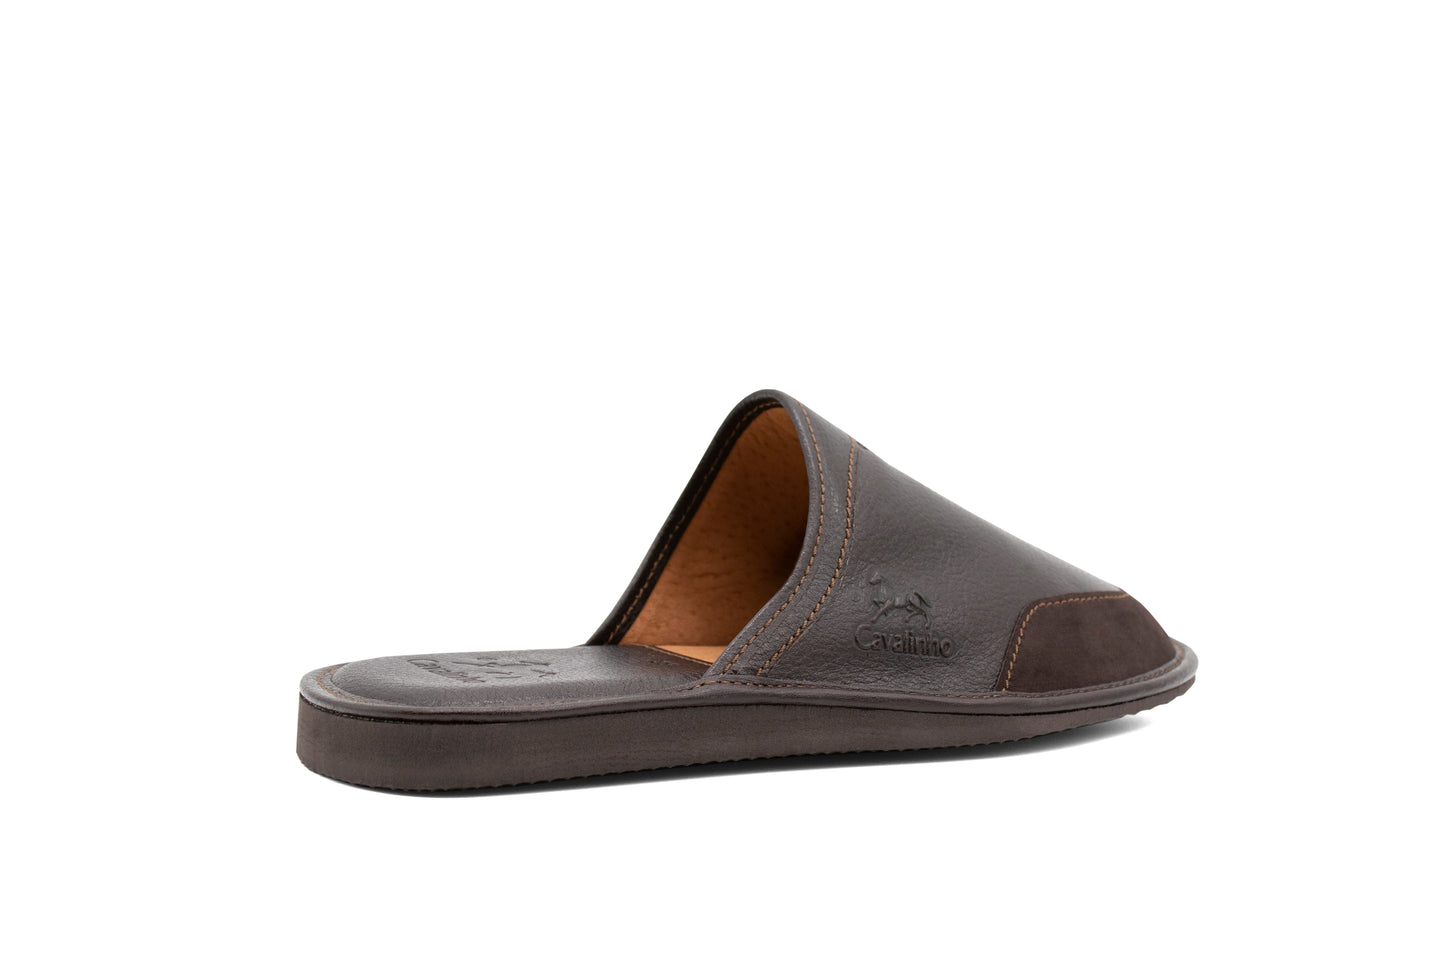 Cavalinho Leather House Slippers - Brown - 48120105.02_3_1_50